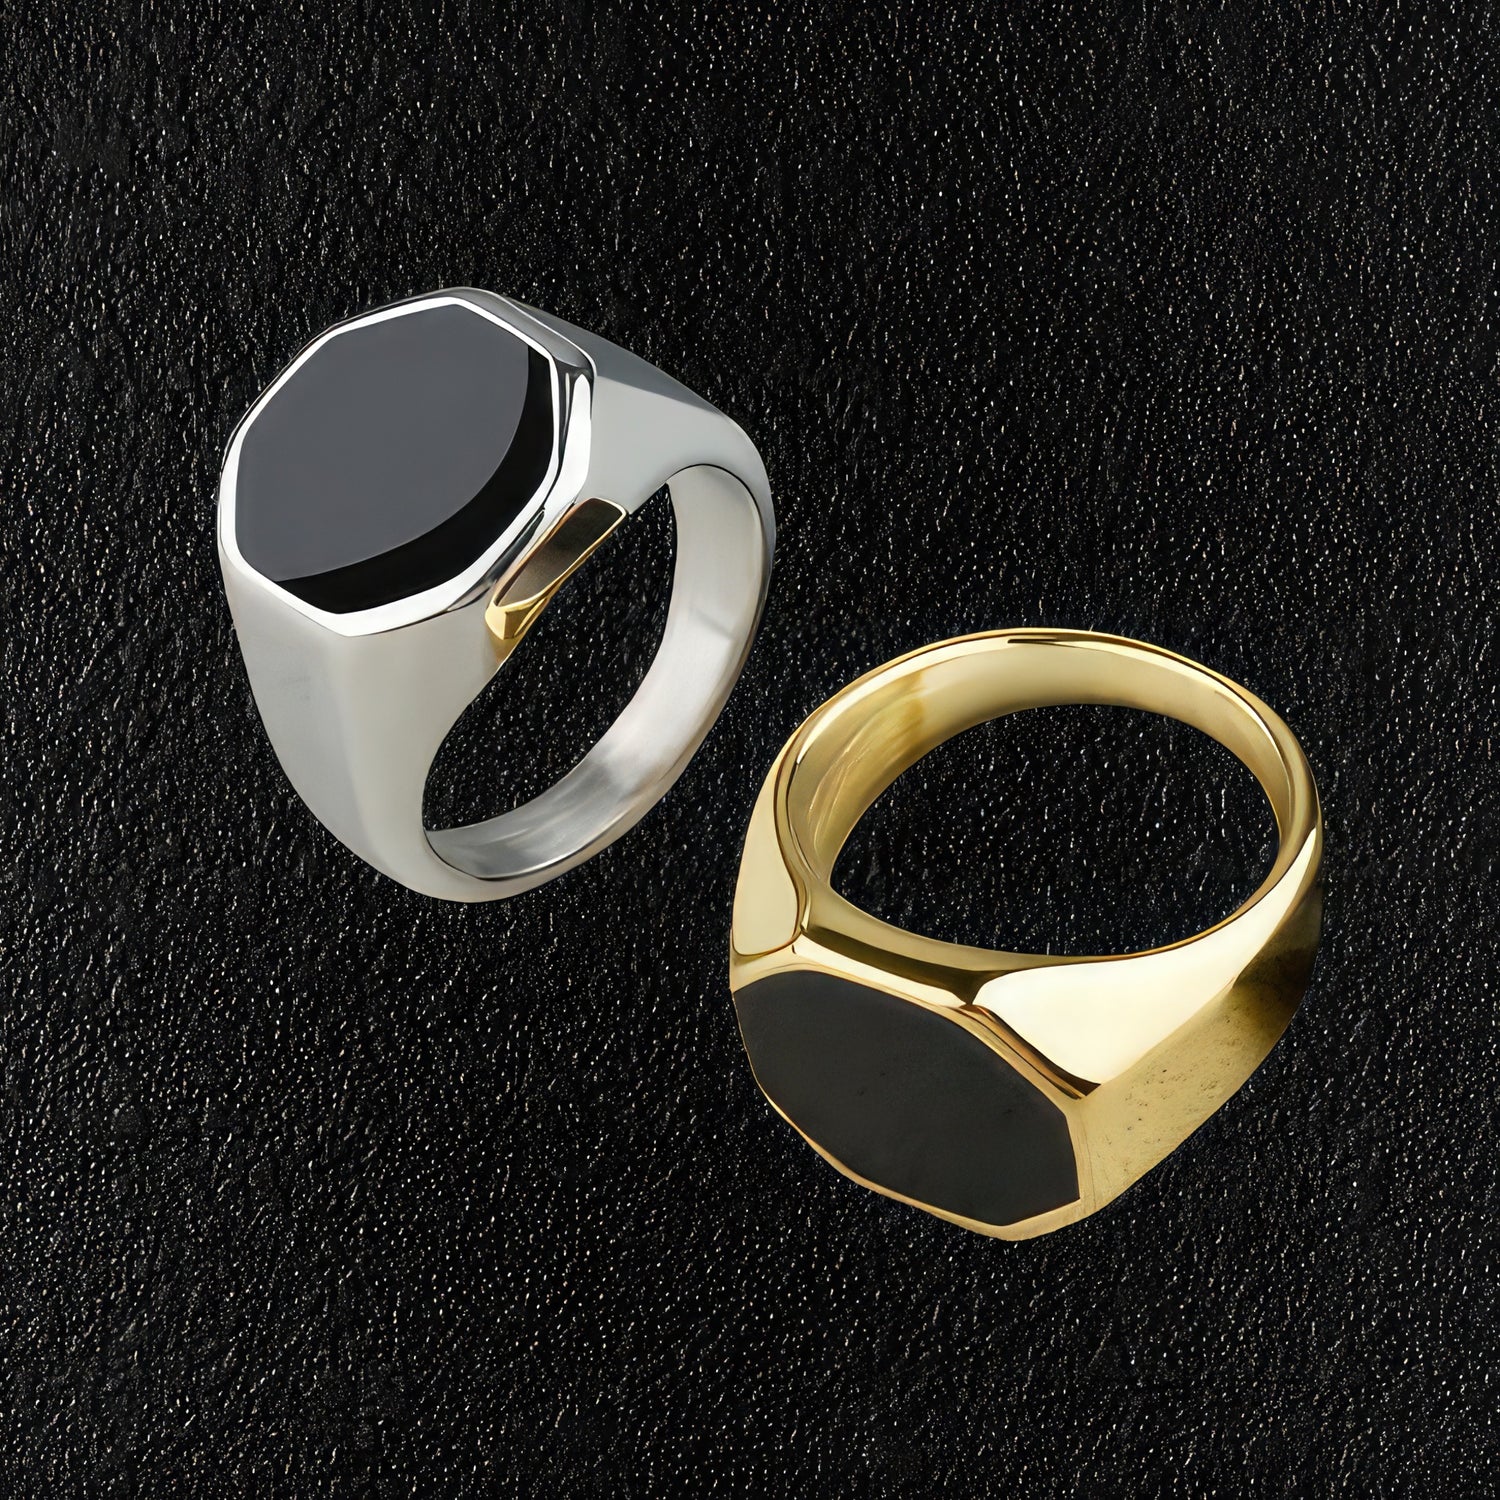 Gold & Silver Octagonal Signet Rings